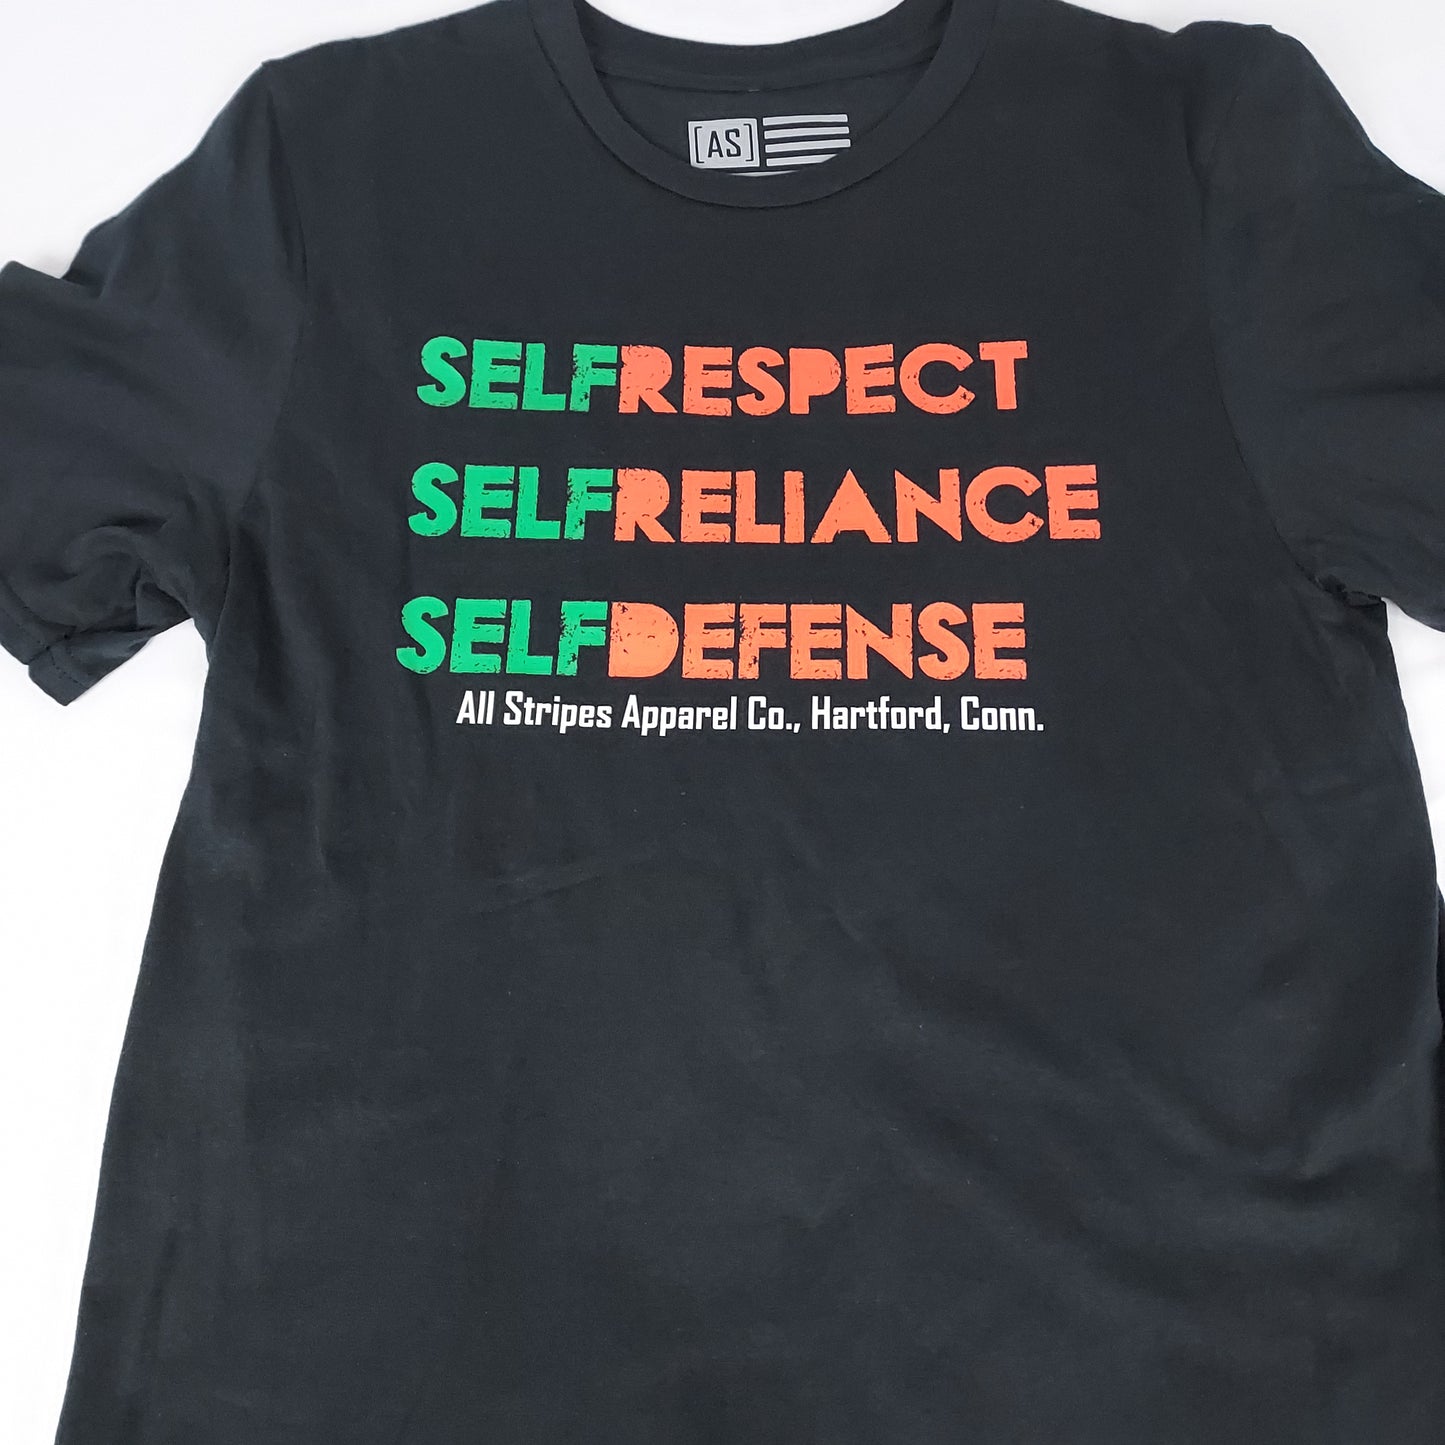 Self Defense T-Shirt in Red, Black & Green